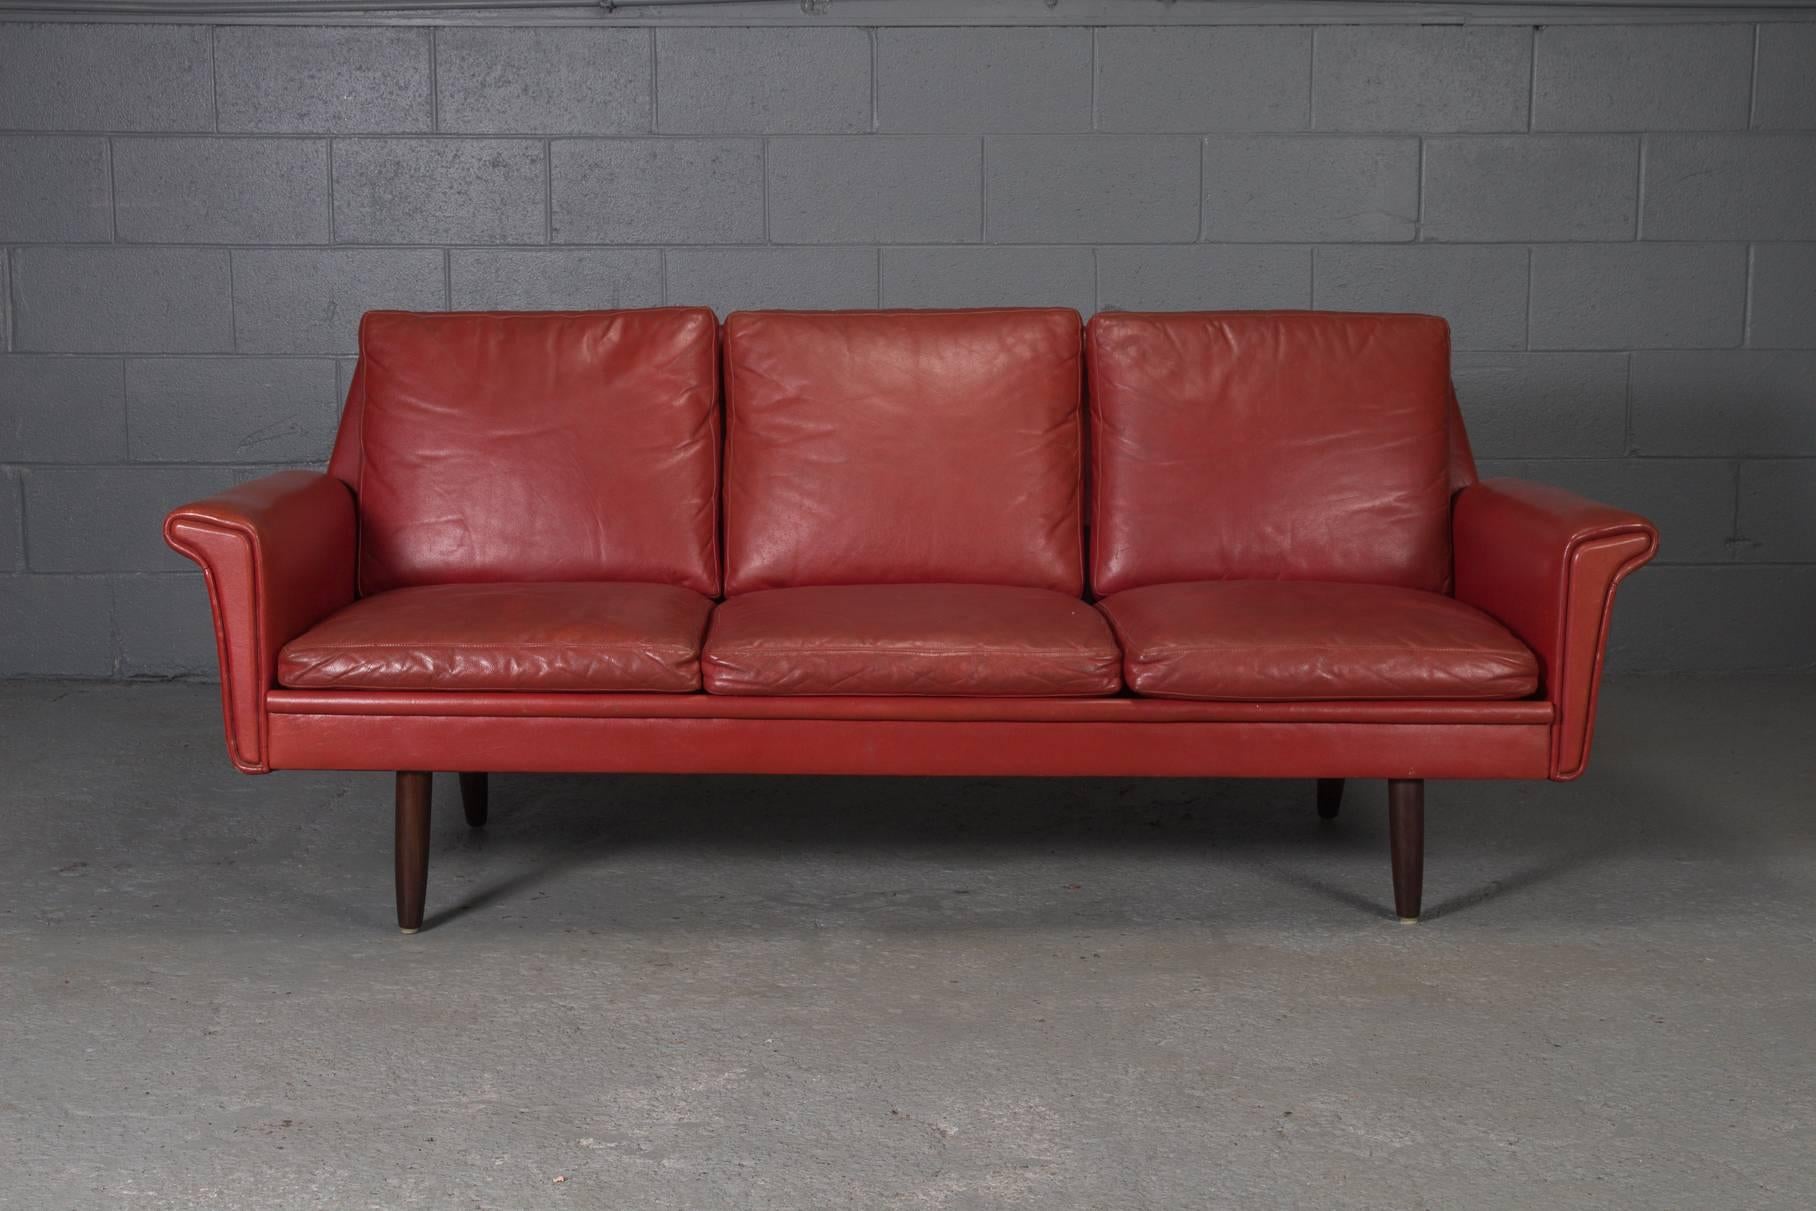 Red leather Danish modern sofa. Matching armchair also available.